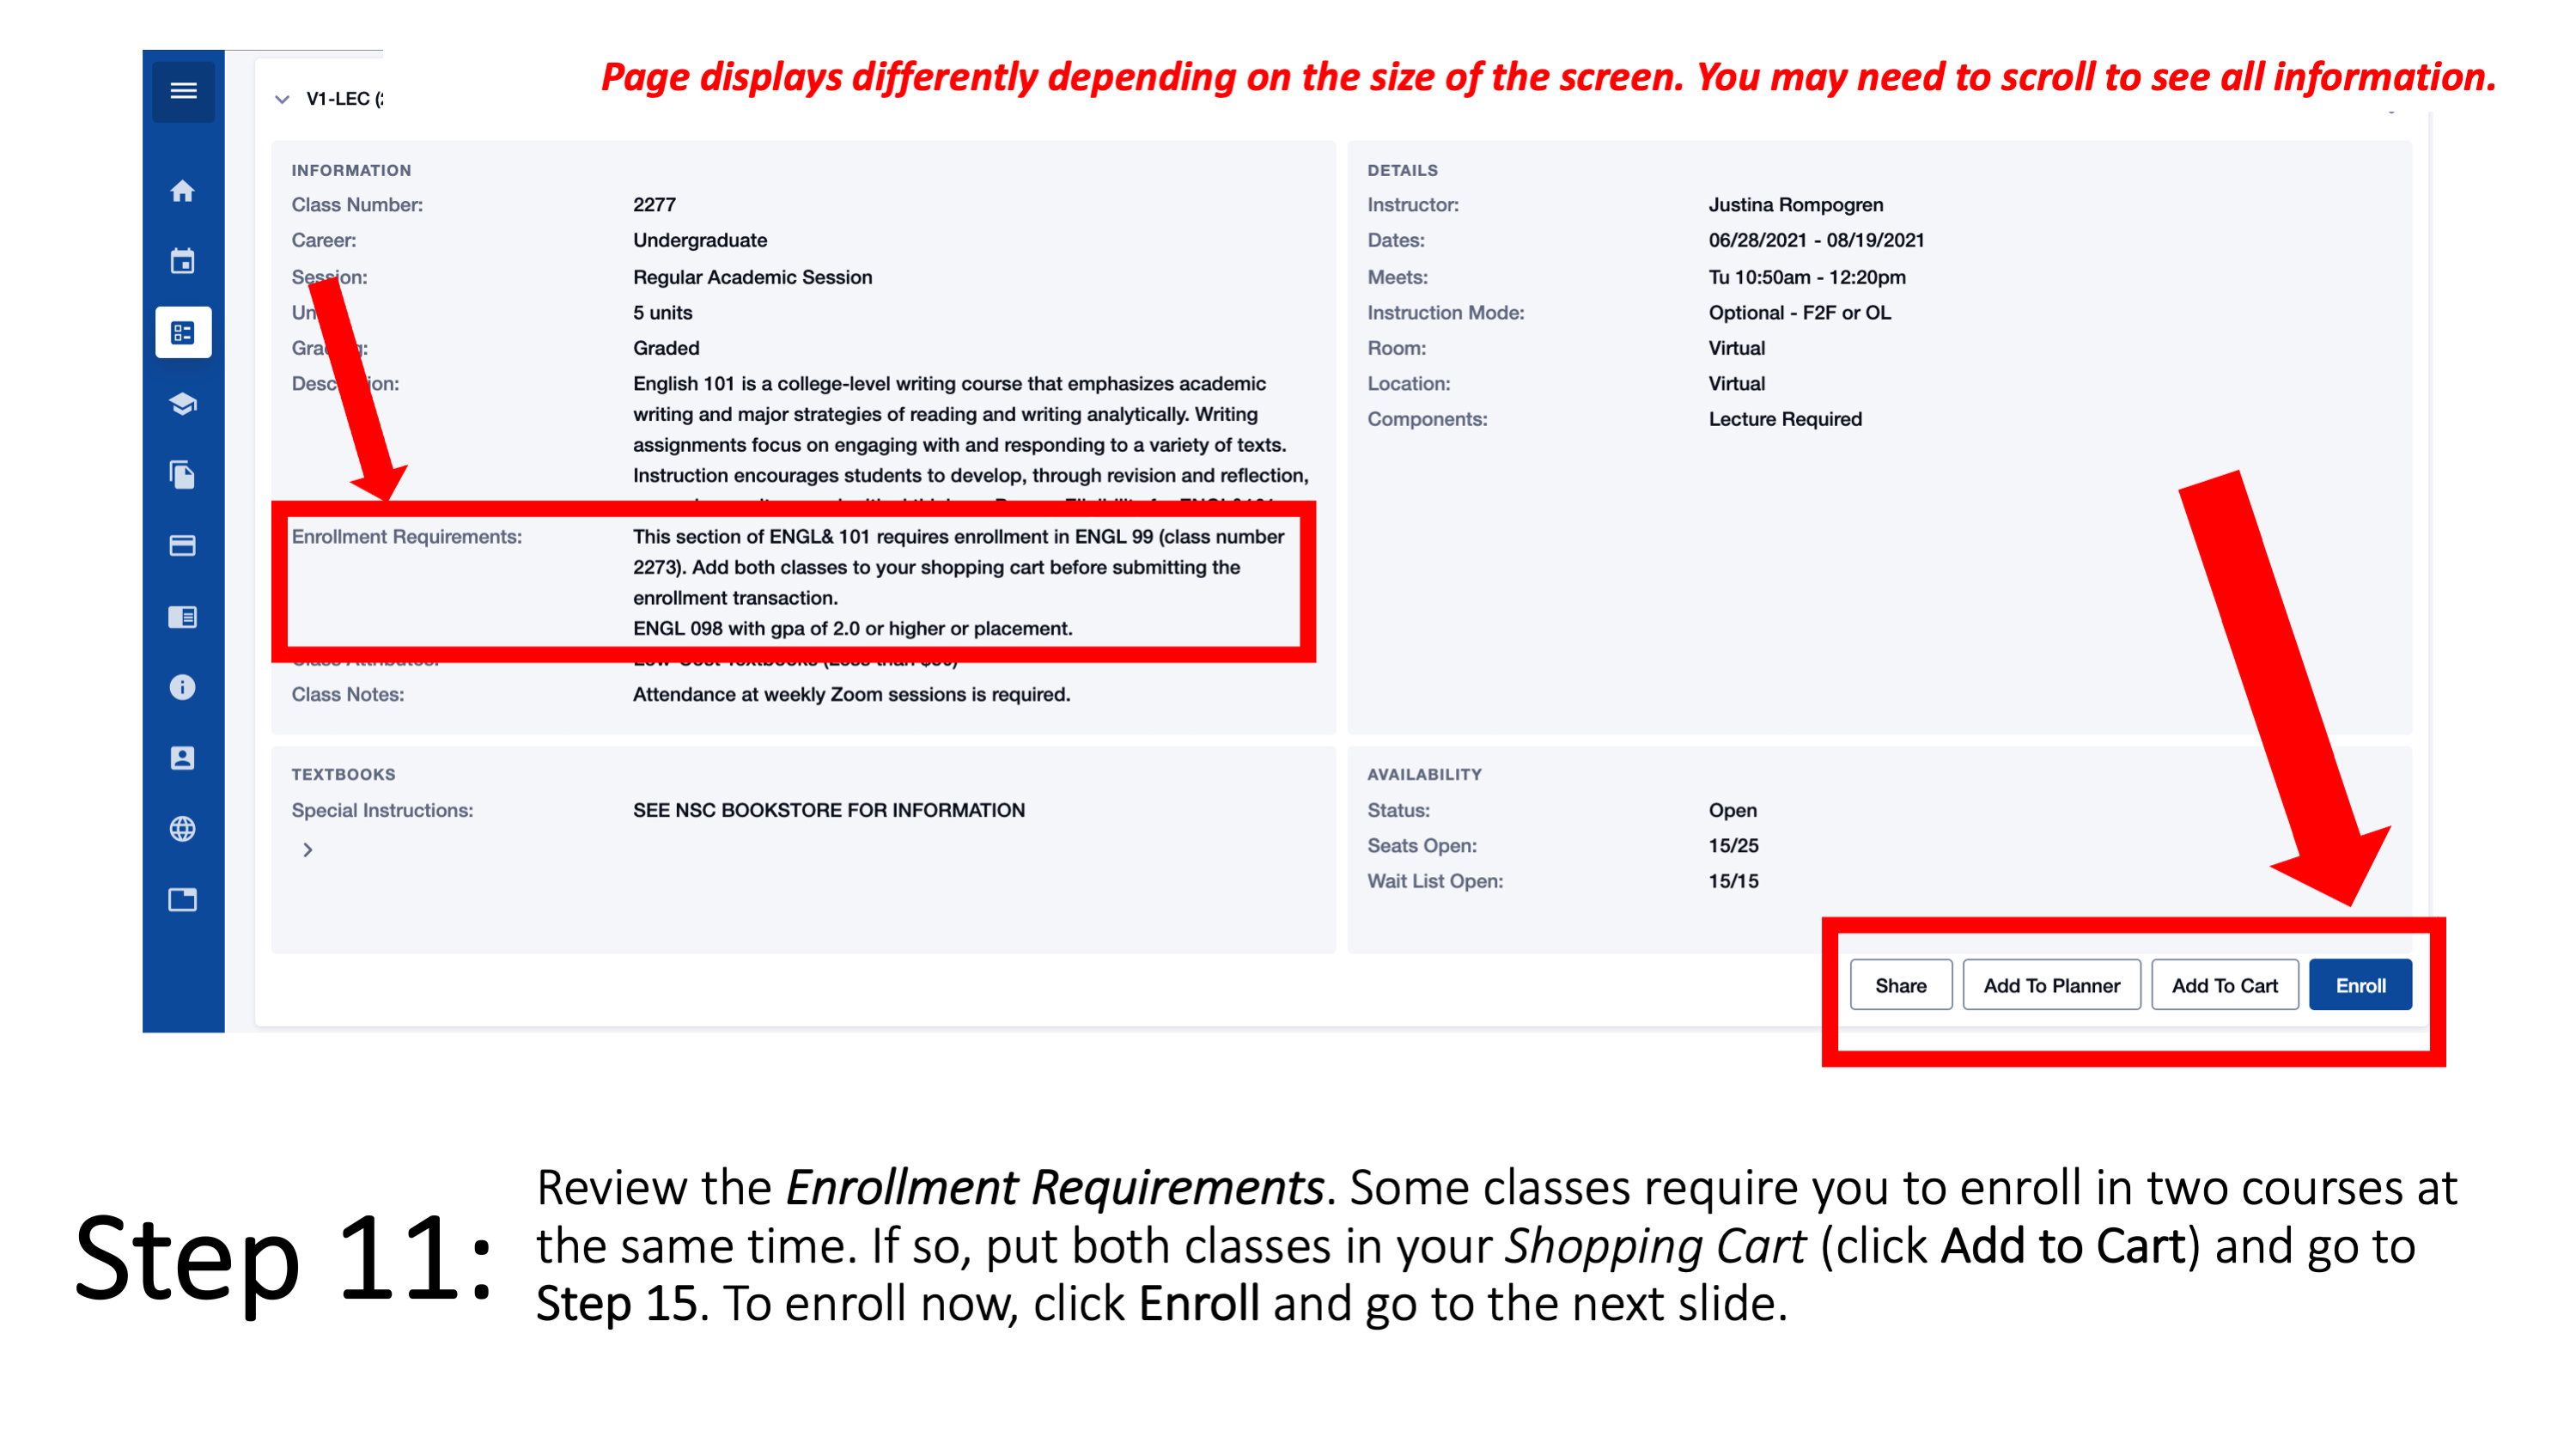 Step 11: Review the Enrollment Requirements. Some classes require you to enroll in two courses at the same time. If so, put both classes in your Shopping Cart (click Add to Cart) and go to Step 15. To enroll now, click Enroll and go to the next slide. Page displays differently depending on the size of the screen. You may need to scroll to see all information.